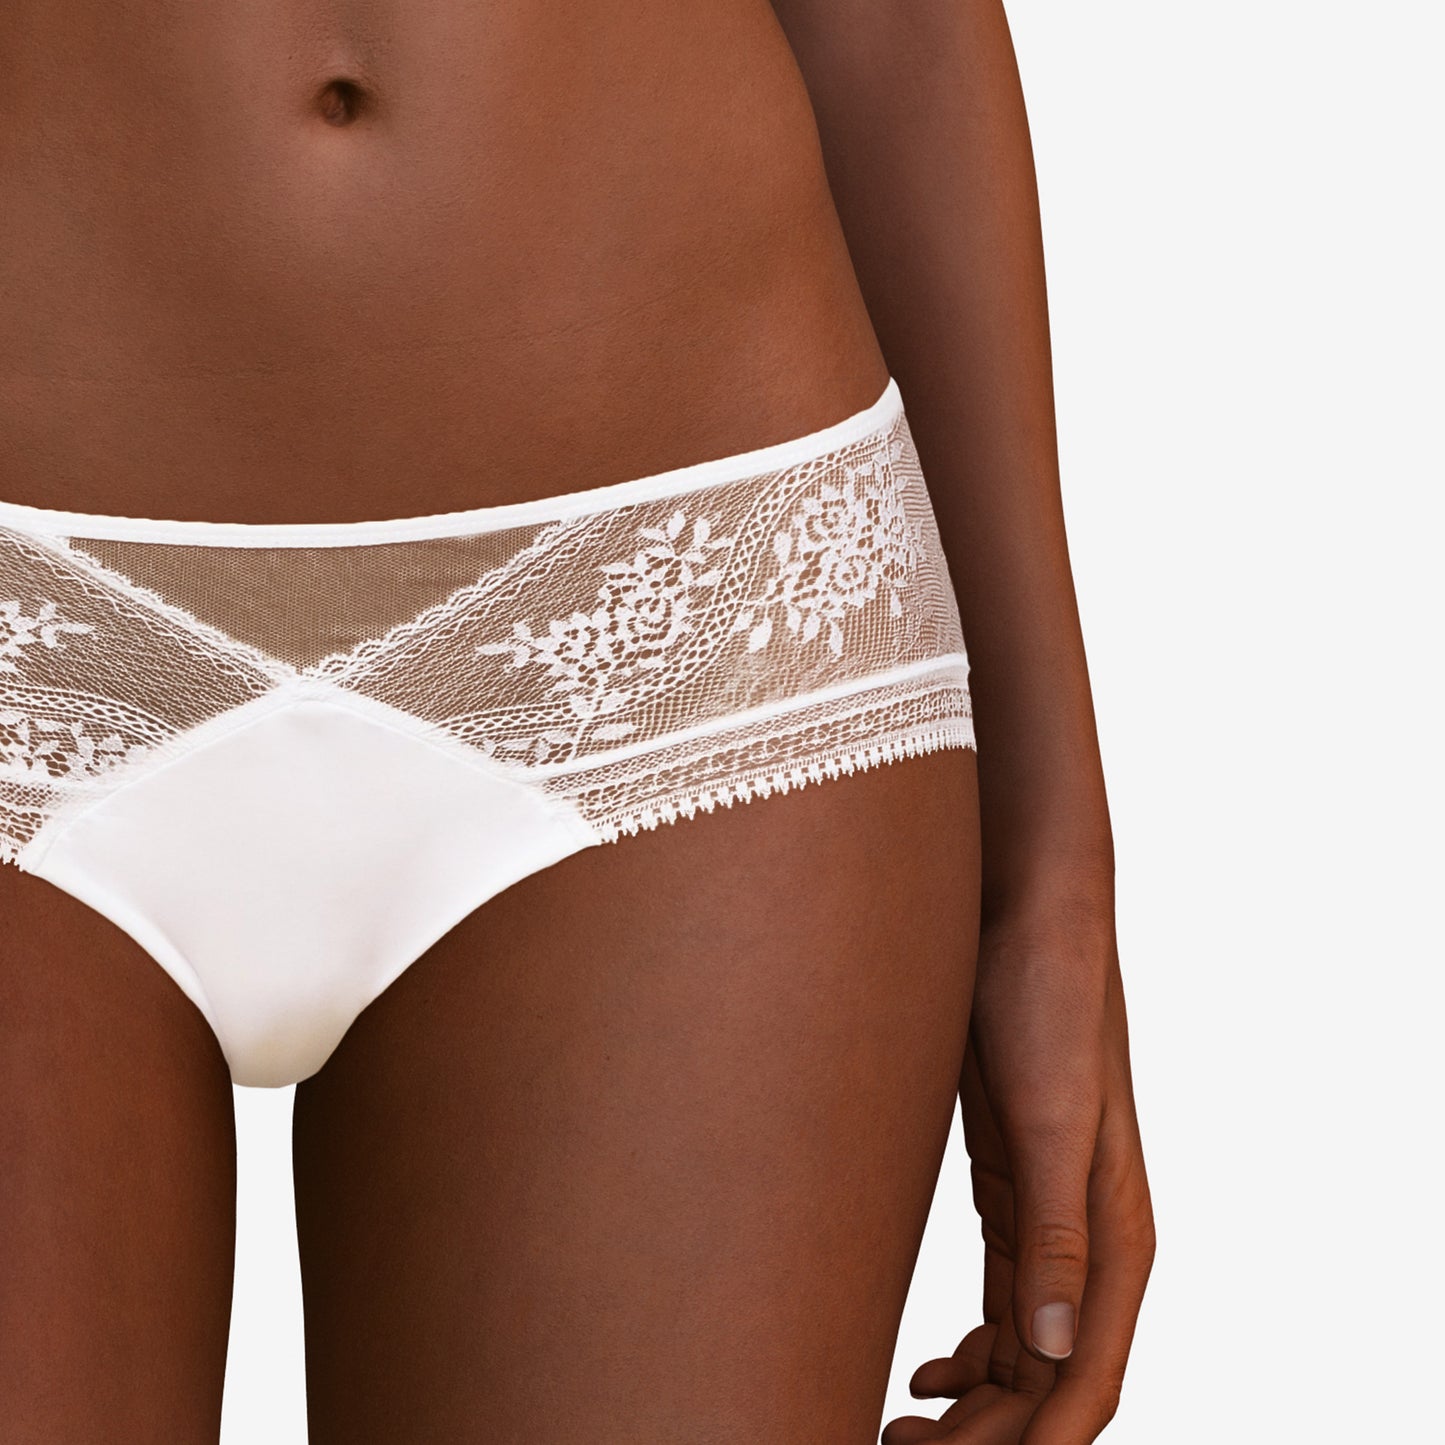 Pretty Things - Passionata Maddie Lace White Short - Underwear Specialists 